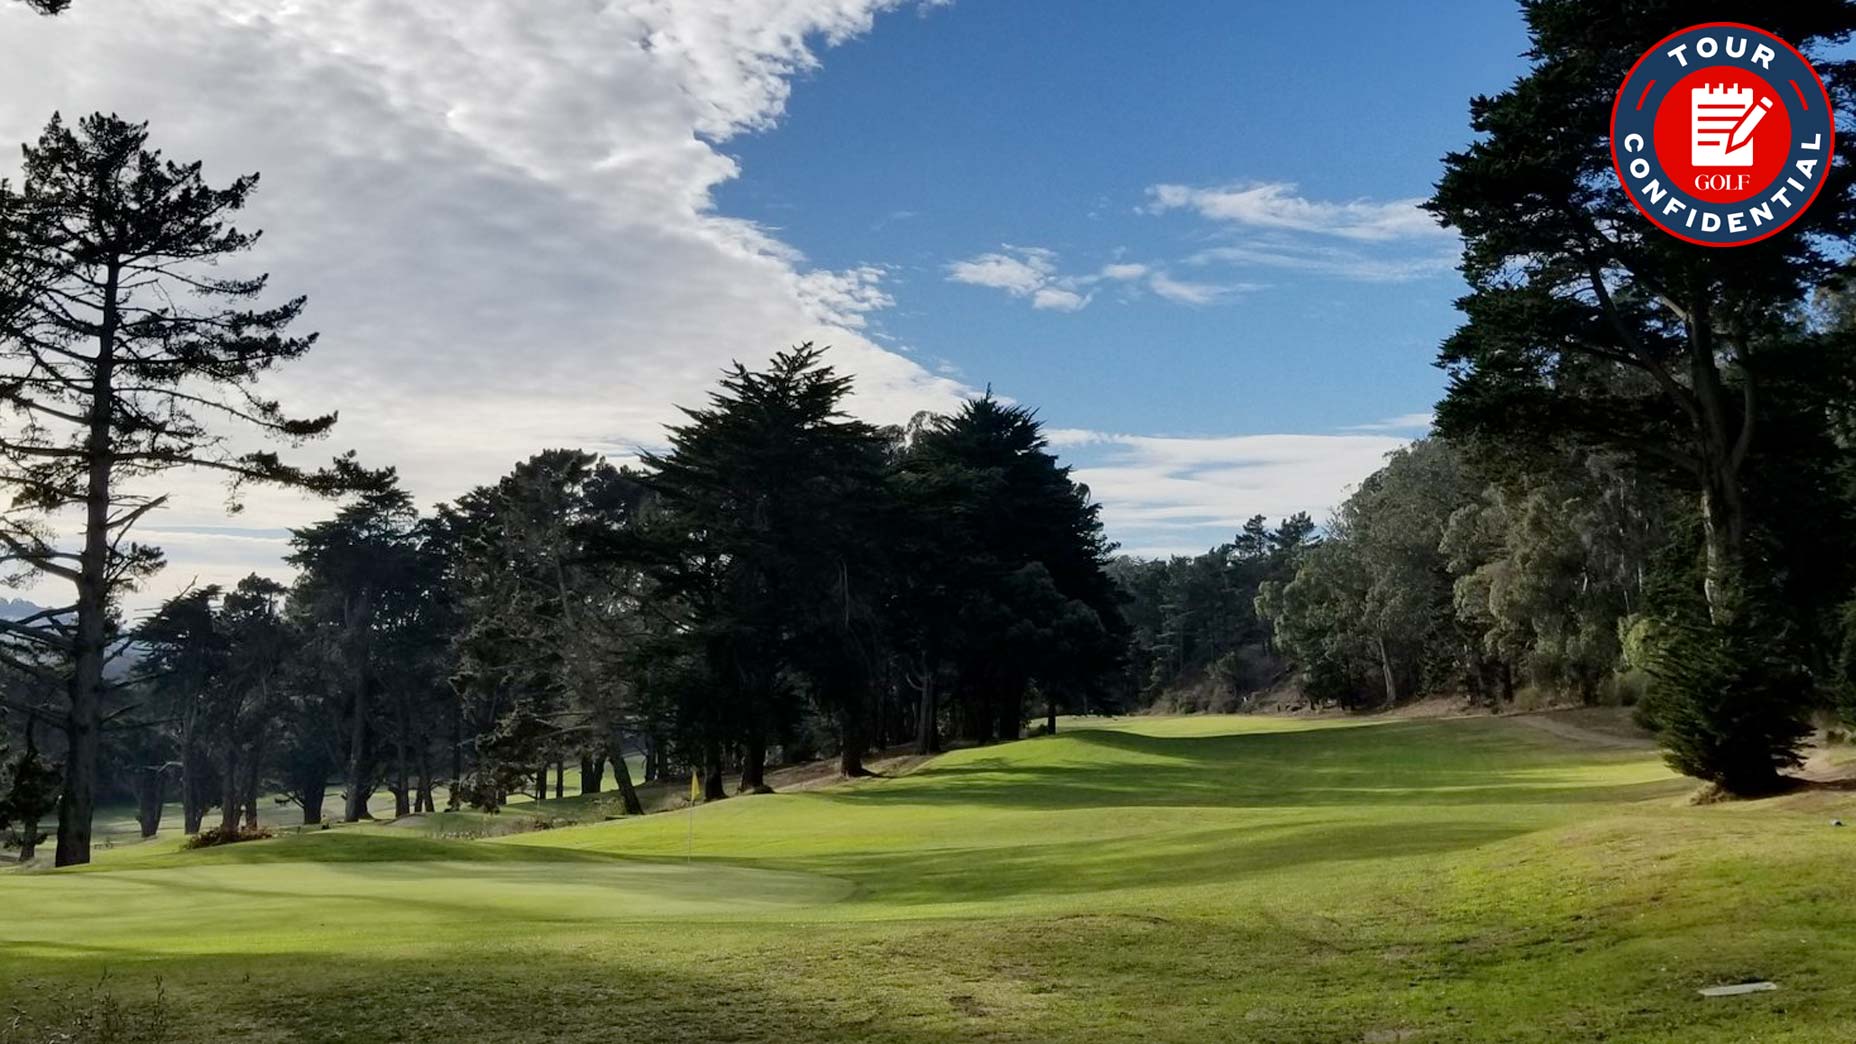 Photo of hole at Gleneagles GC at McLaren Park in San Francisco, Calif.